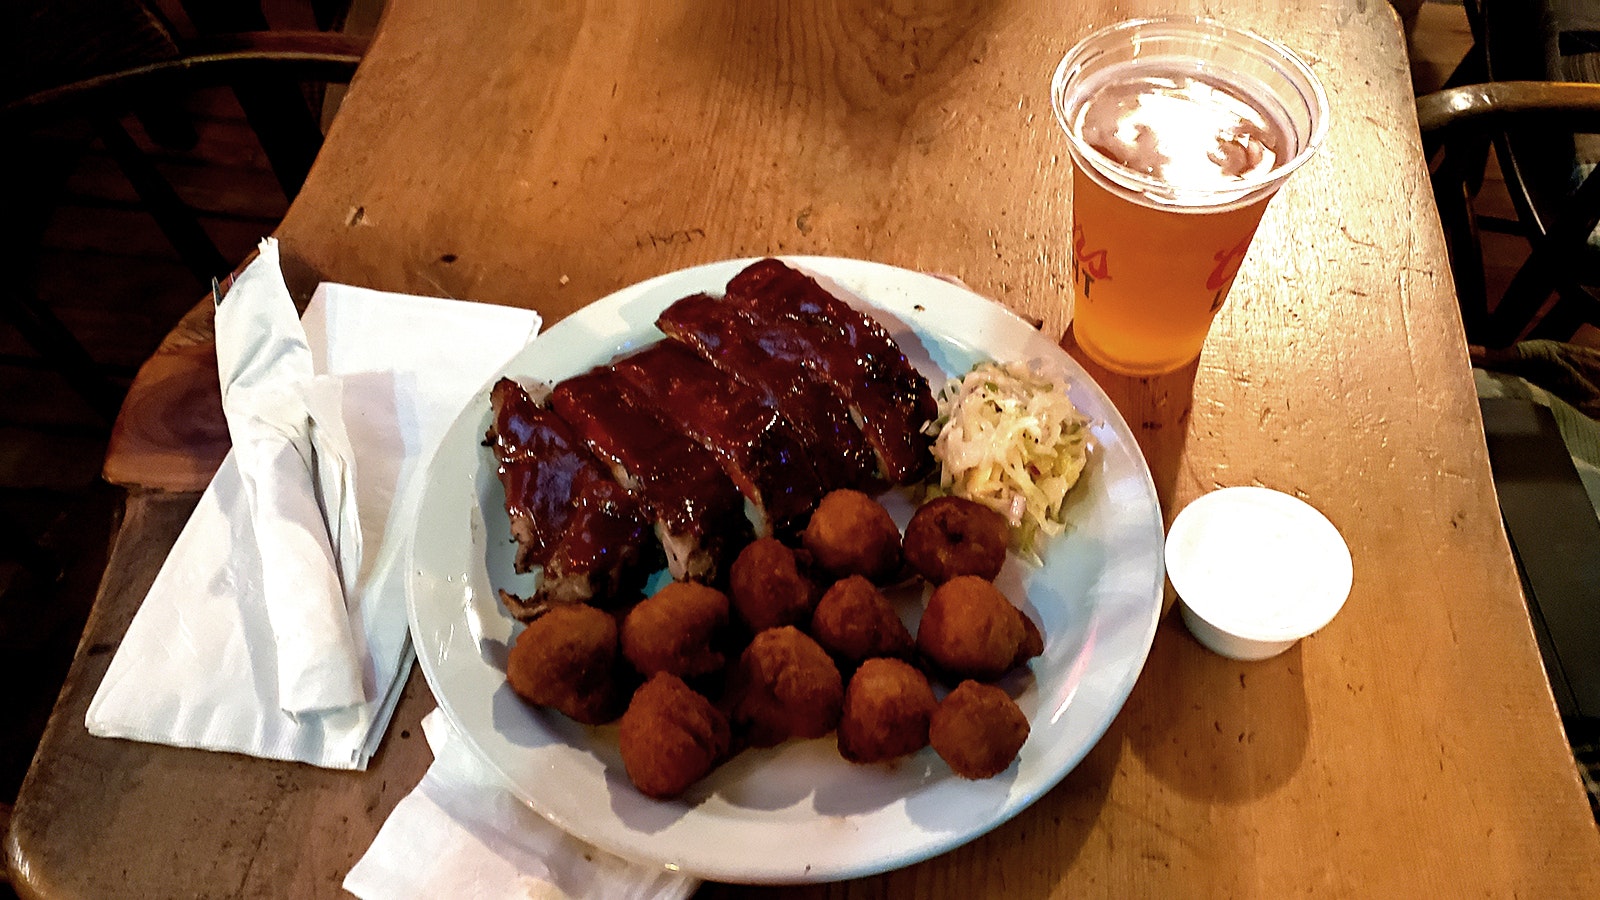 The ribs in the nearby saloon are very tender and go great with fried mushrooms. A selection of Wyoming craft beers are available to round out the meal.